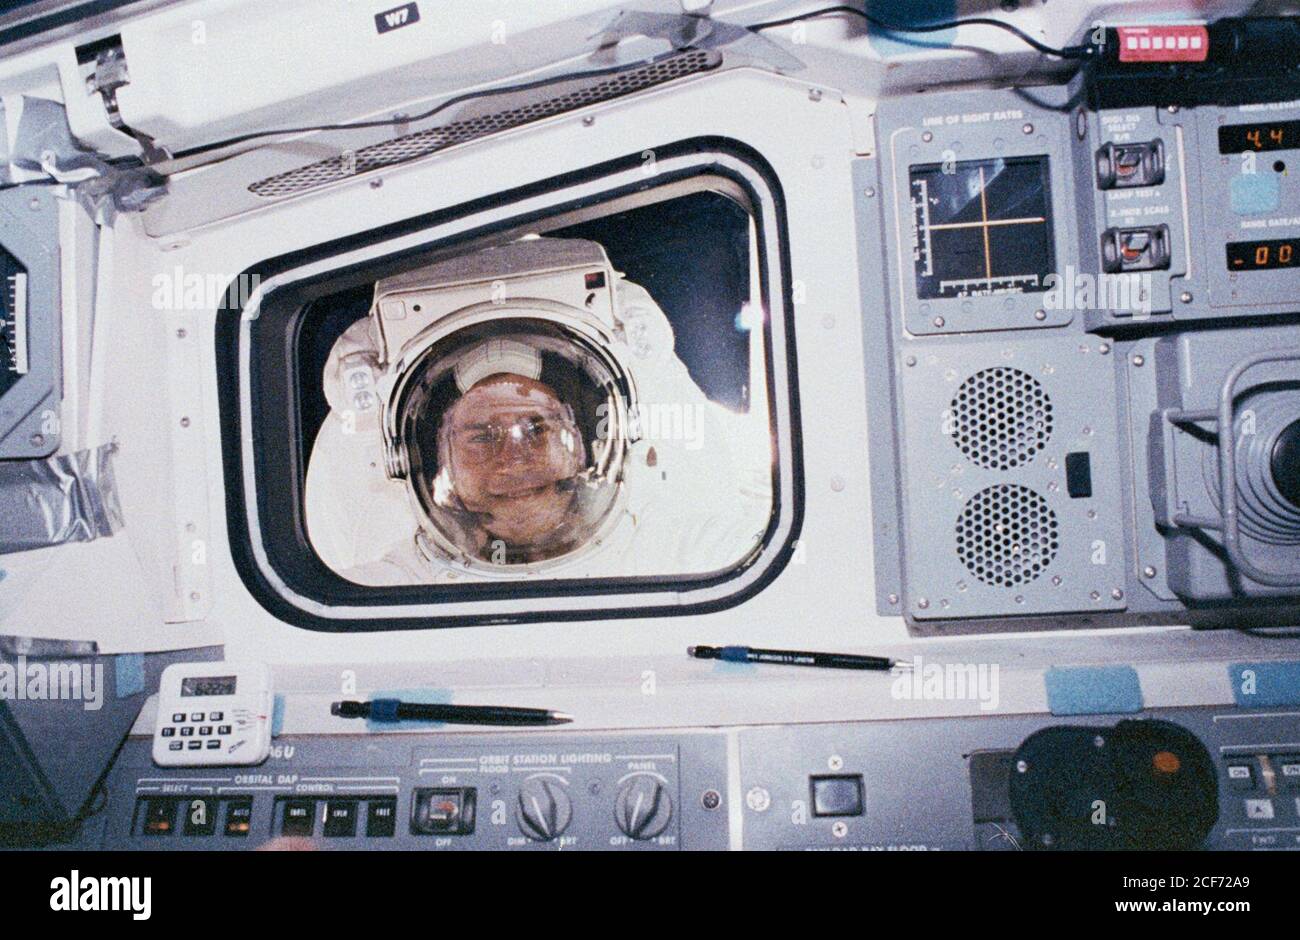 Rick Hieb, a Mission Specialist aboard STS-49, looks into the aft flight deck of the orbiter during his spacewalk. STS-49, which launched on May 7, 1992 and returned:to Earth on May 16, 1992, marked the first flight of Endeavour and the first shuttle mission to feature four EVAs. Hieb, along with fellow astronauts Pierre Thuot and Thomas Akers helped to recover INTELSAT VI, a communications satellite whose orbit had become unstable. Stock Photo